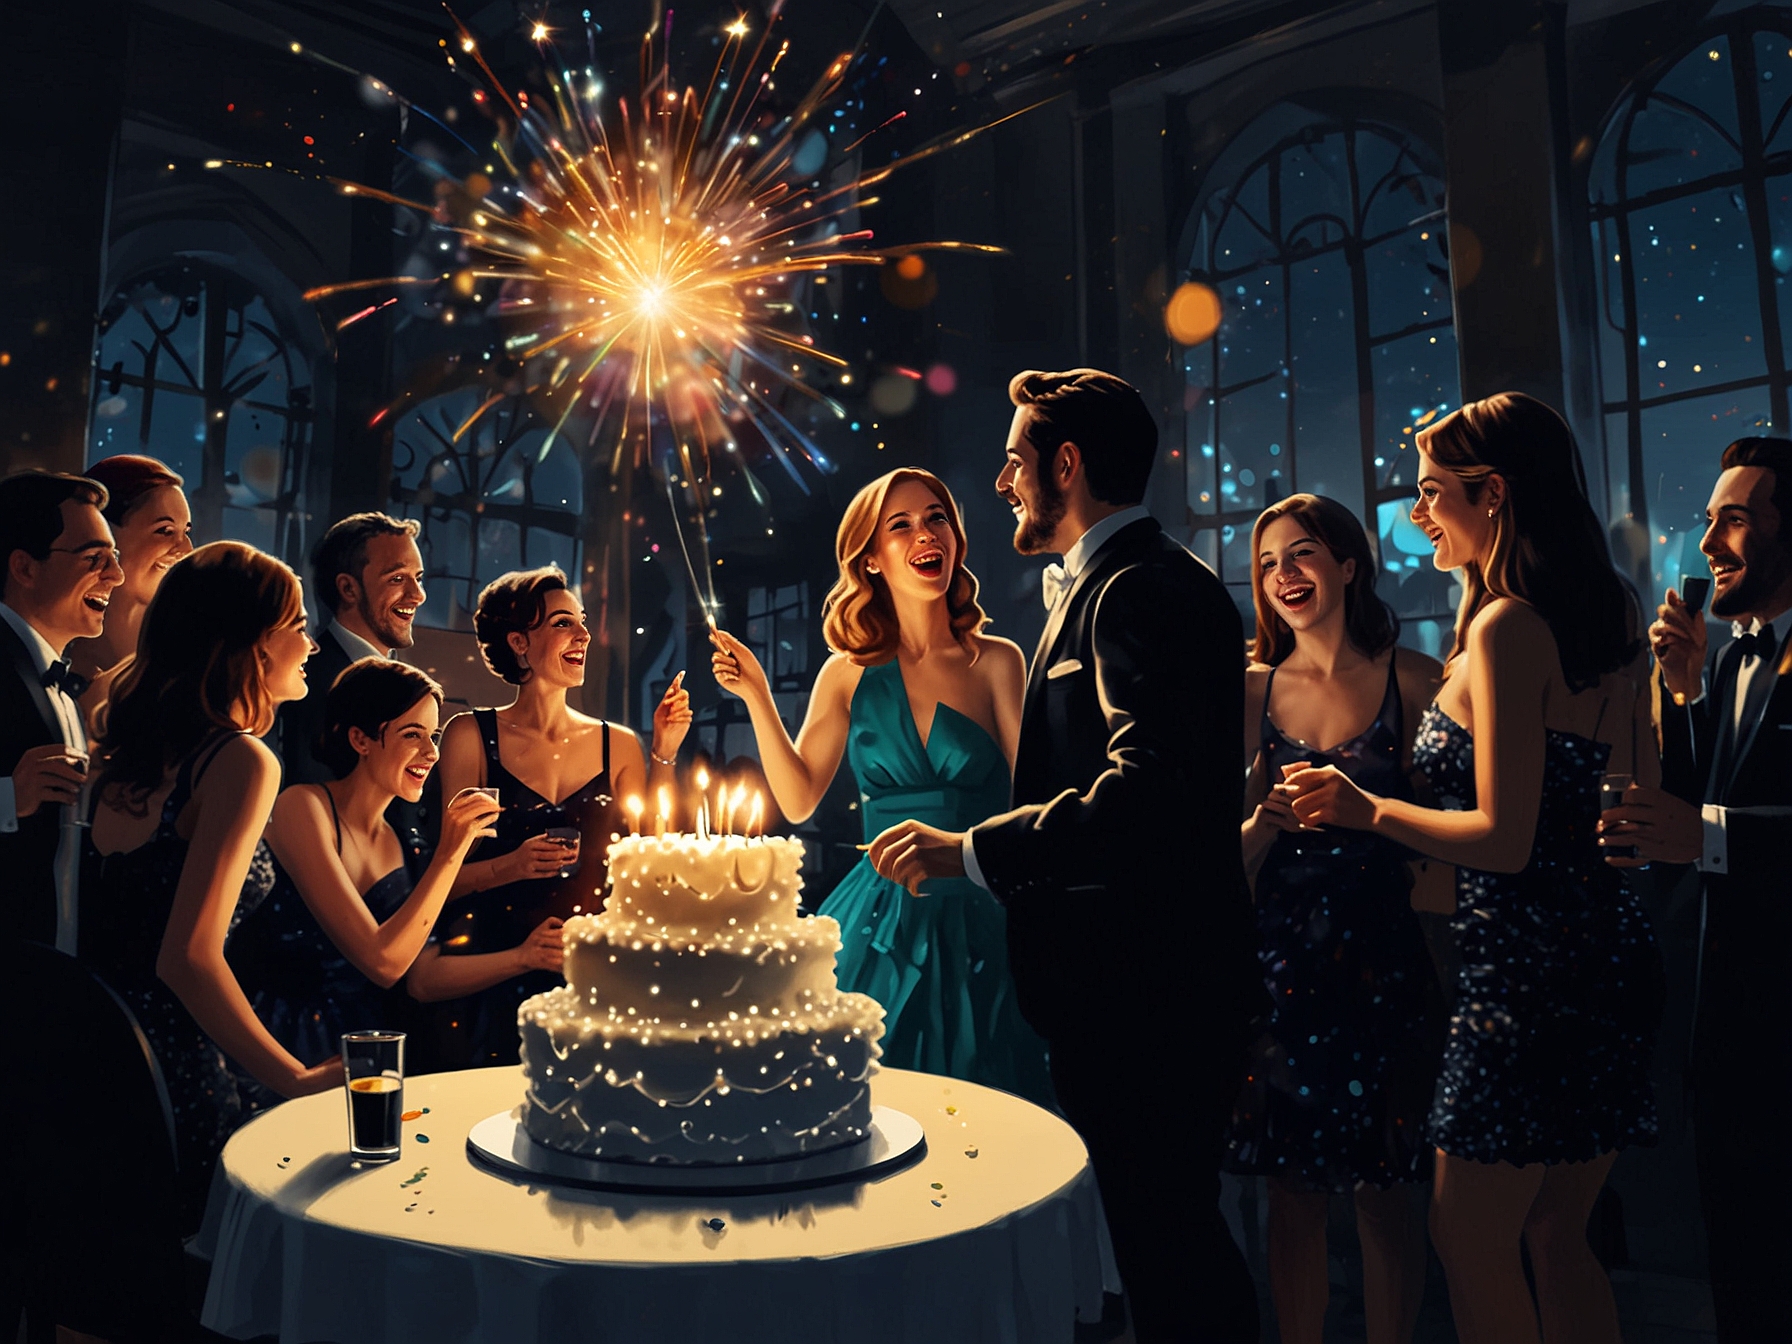 A glamorous scene featuring sparklers-lit birthday cake at midnight, with attendees in avant-garde outfits celebrating exuberantly amidst a sensory-filled atmosphere.